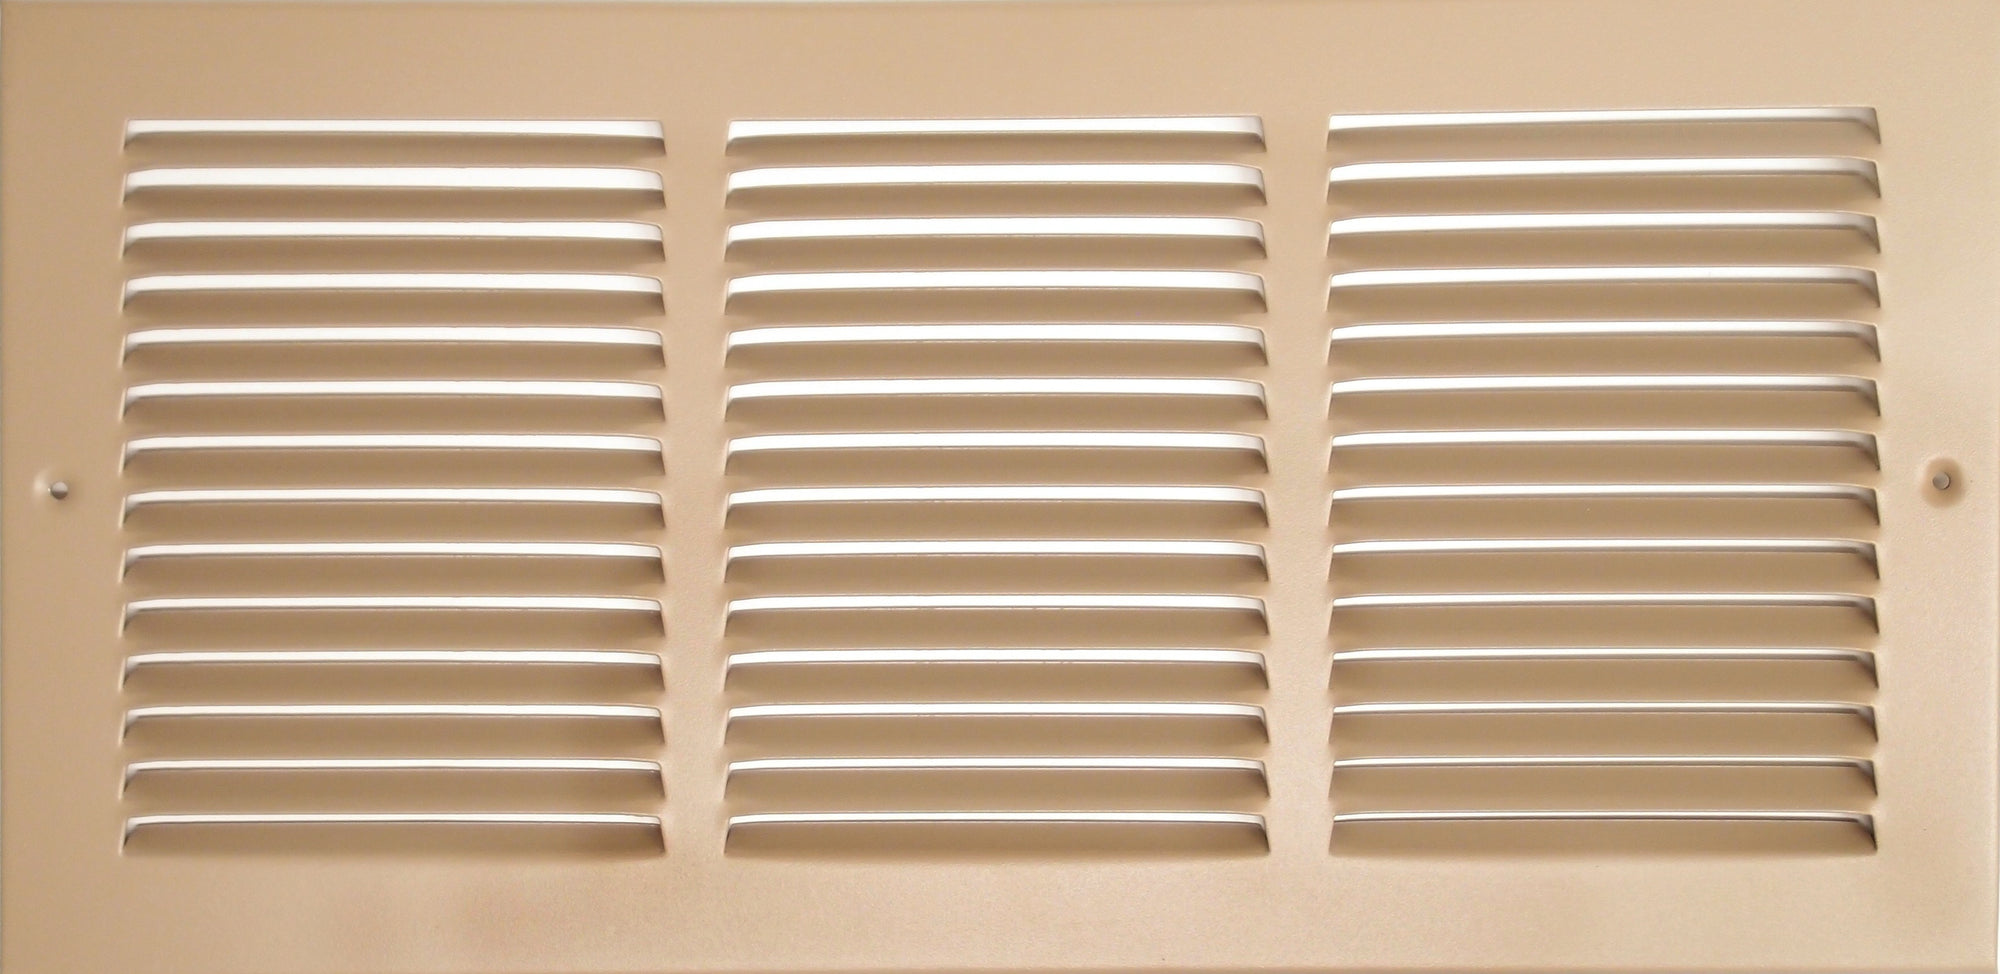 18" X 6" Air Vent Return Grilles - Sidewall and Ceiling - Steel